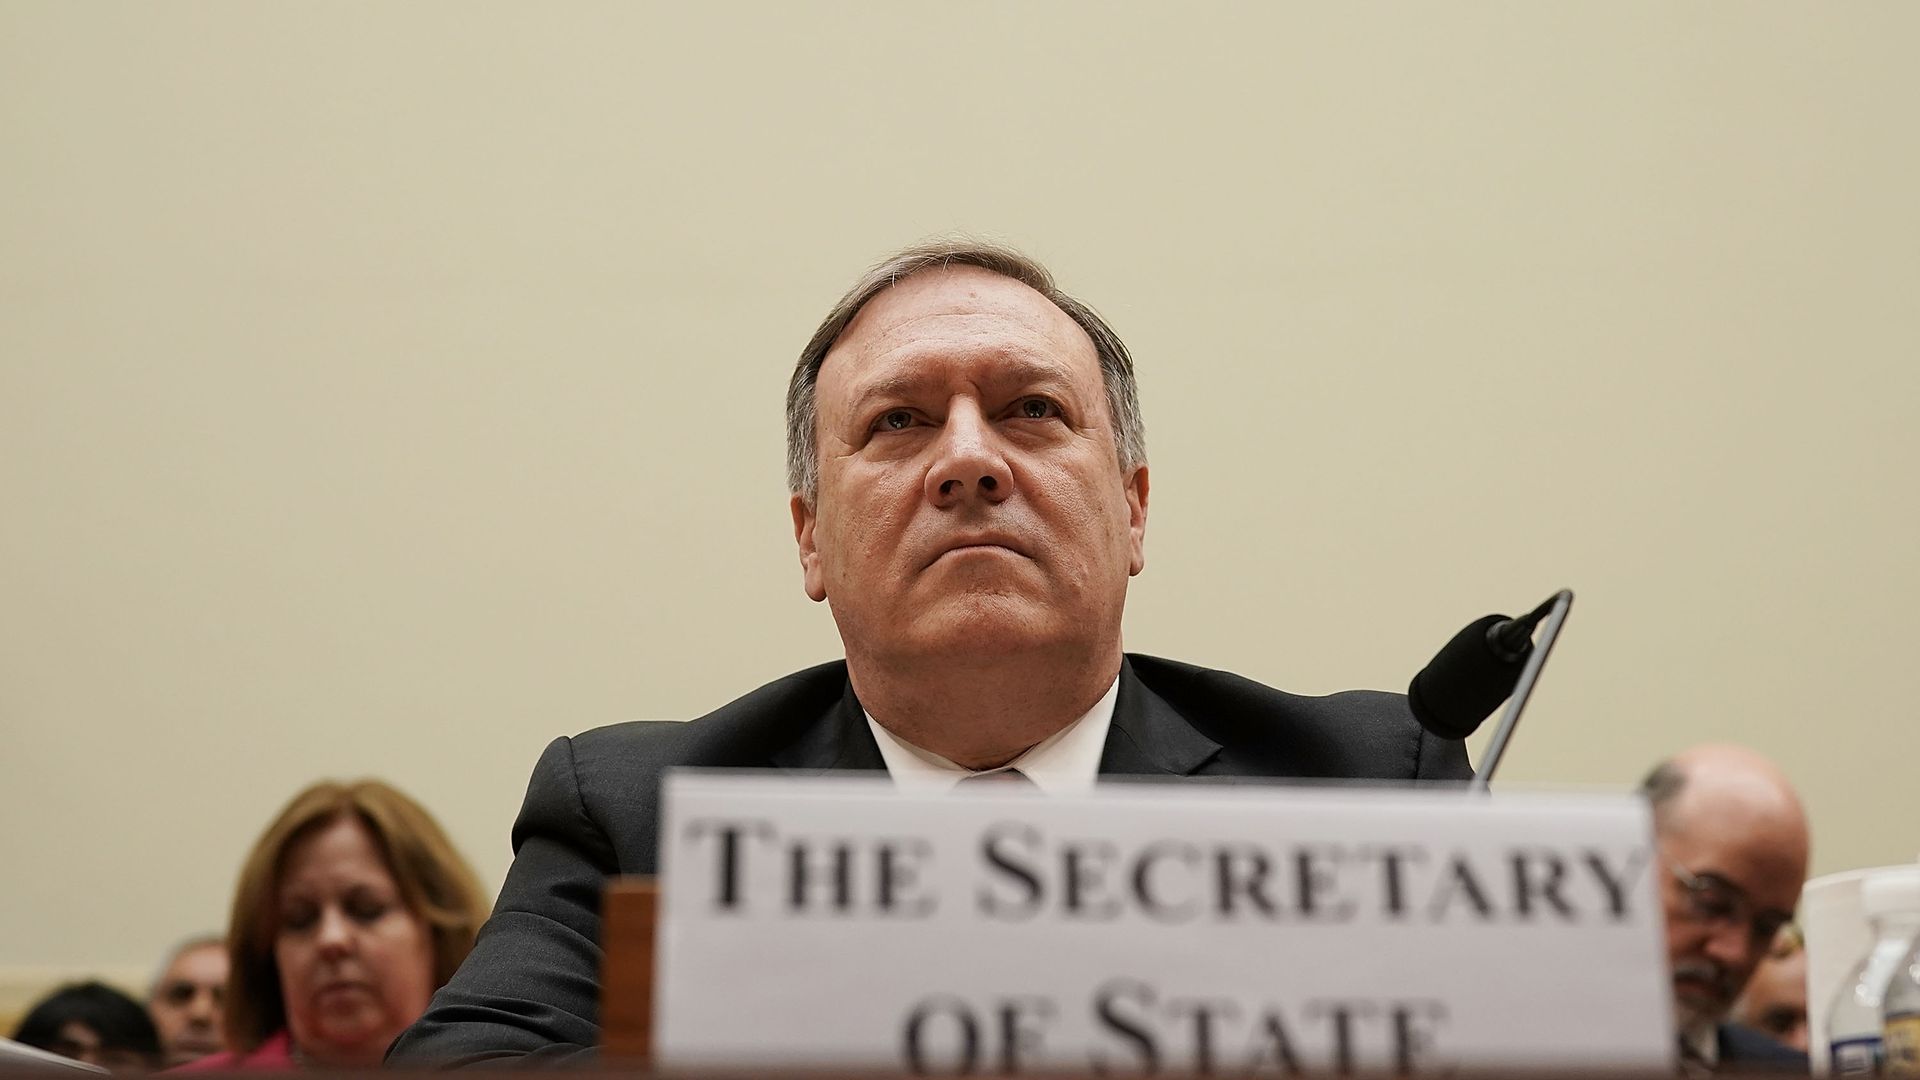 Mike Pompeo with a name plaque in front of him which reads "The Secretary of State" 